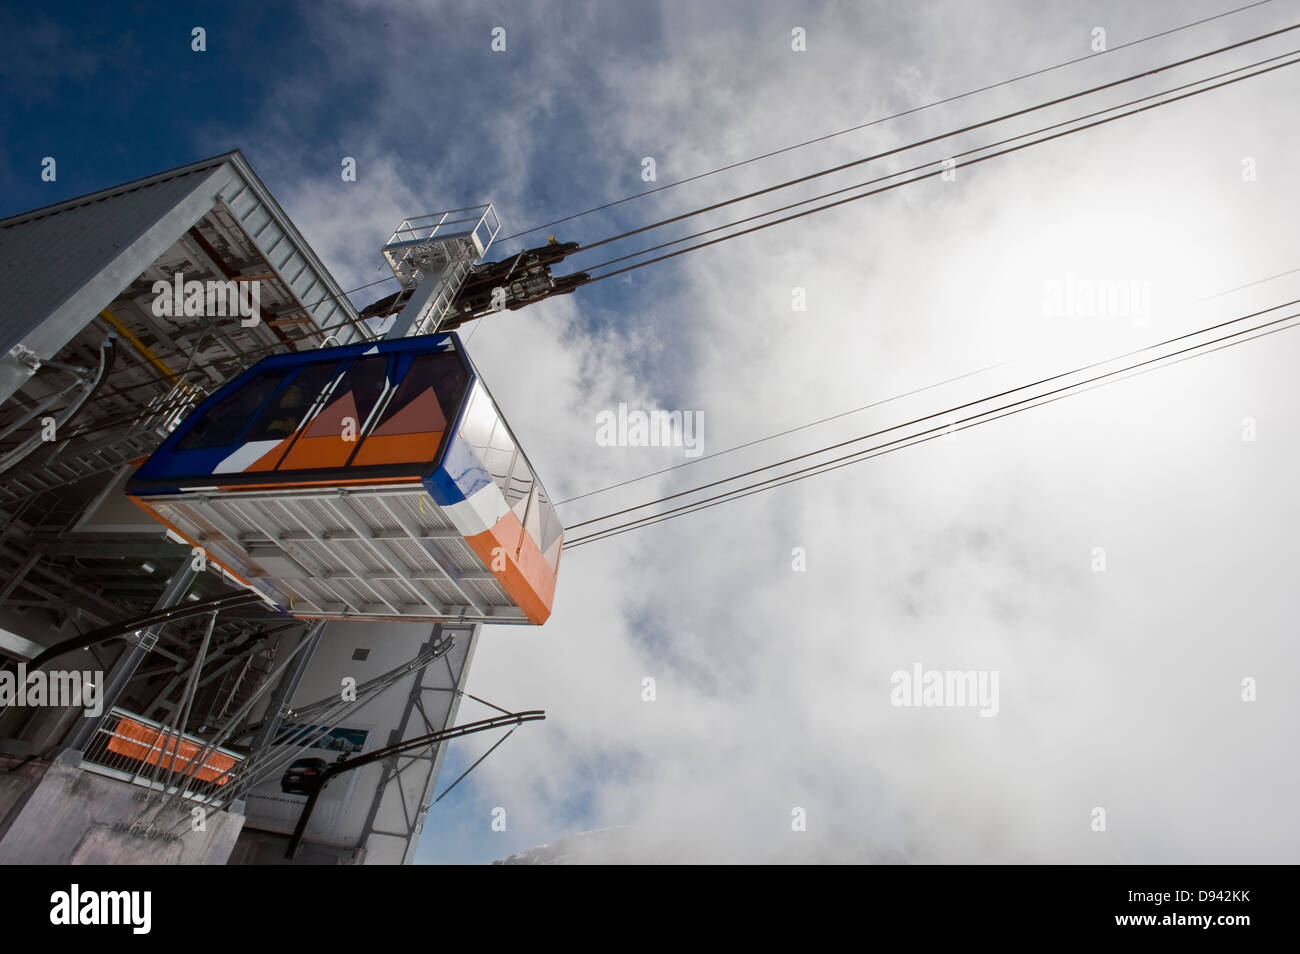 Low angle view of overhead cable car Stock Photo